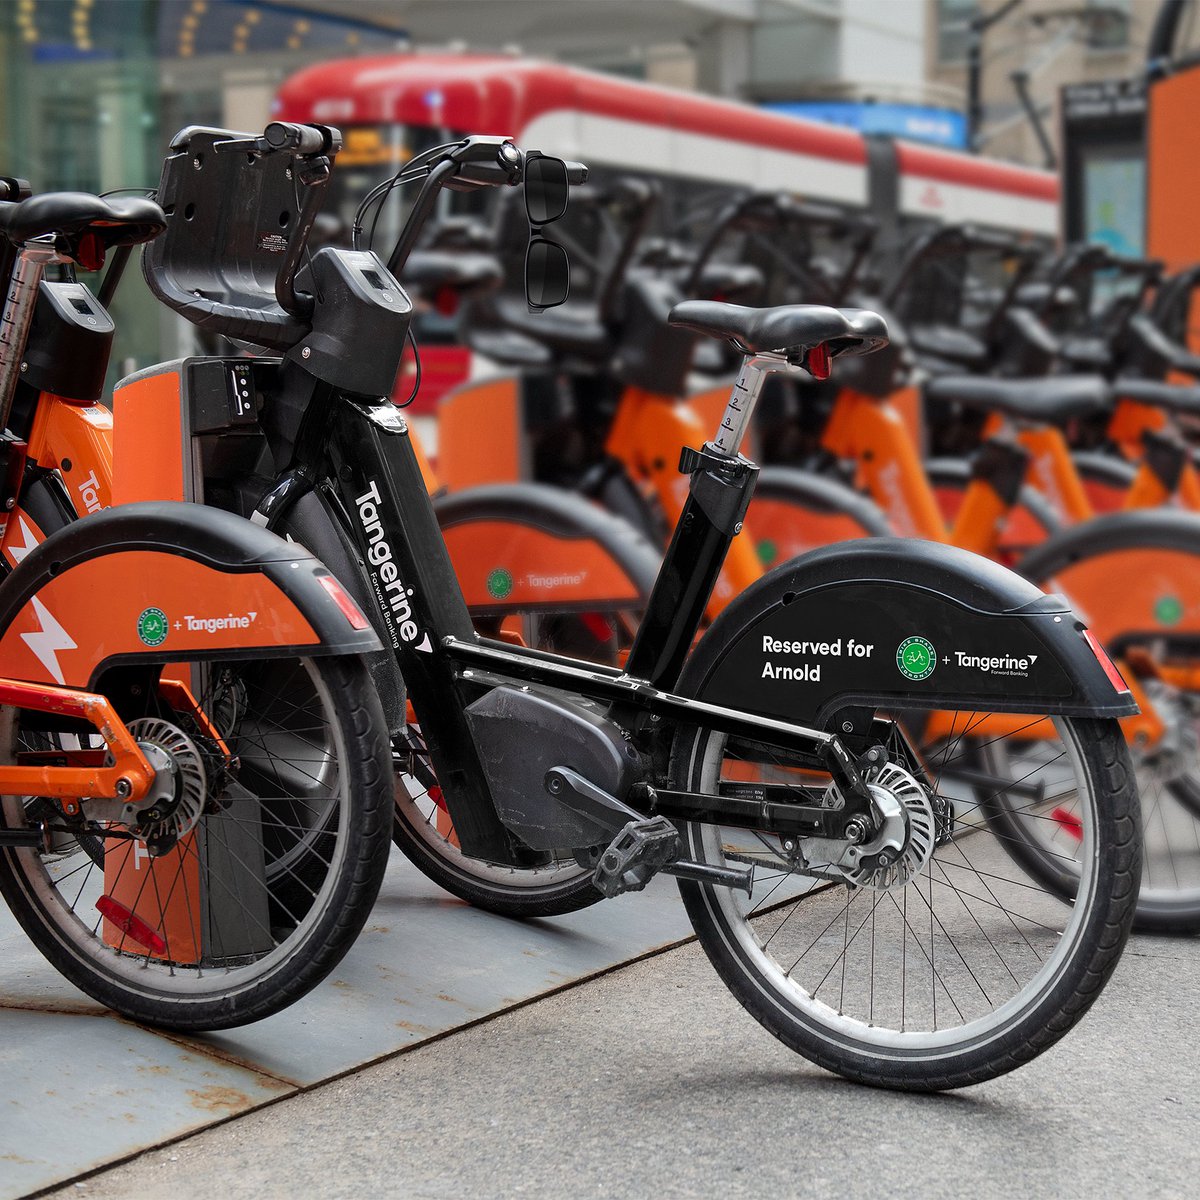 Hey @Schwarzenegger, we know that orange might not be your colour, so we made a bike that’s a little more your style. 🕶️ #BikeShareTO #TangerineBikes @BikeShareTO